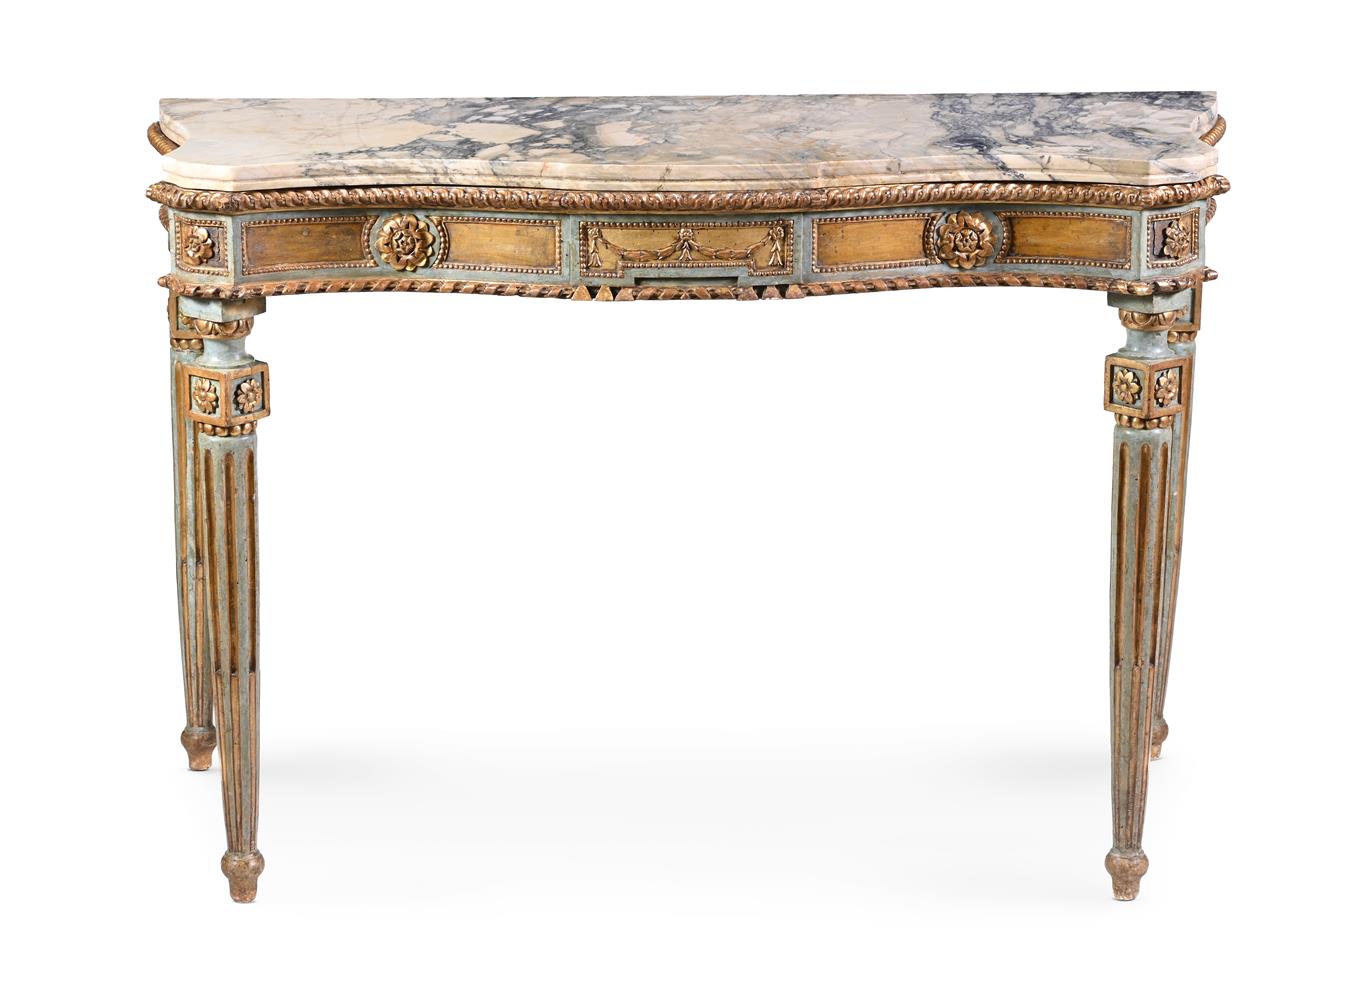 AN ITALIAN GILTWOOD AND GREEN PAINTED SIDE TABLE, LATE 18TH CENTURY - Image 2 of 4